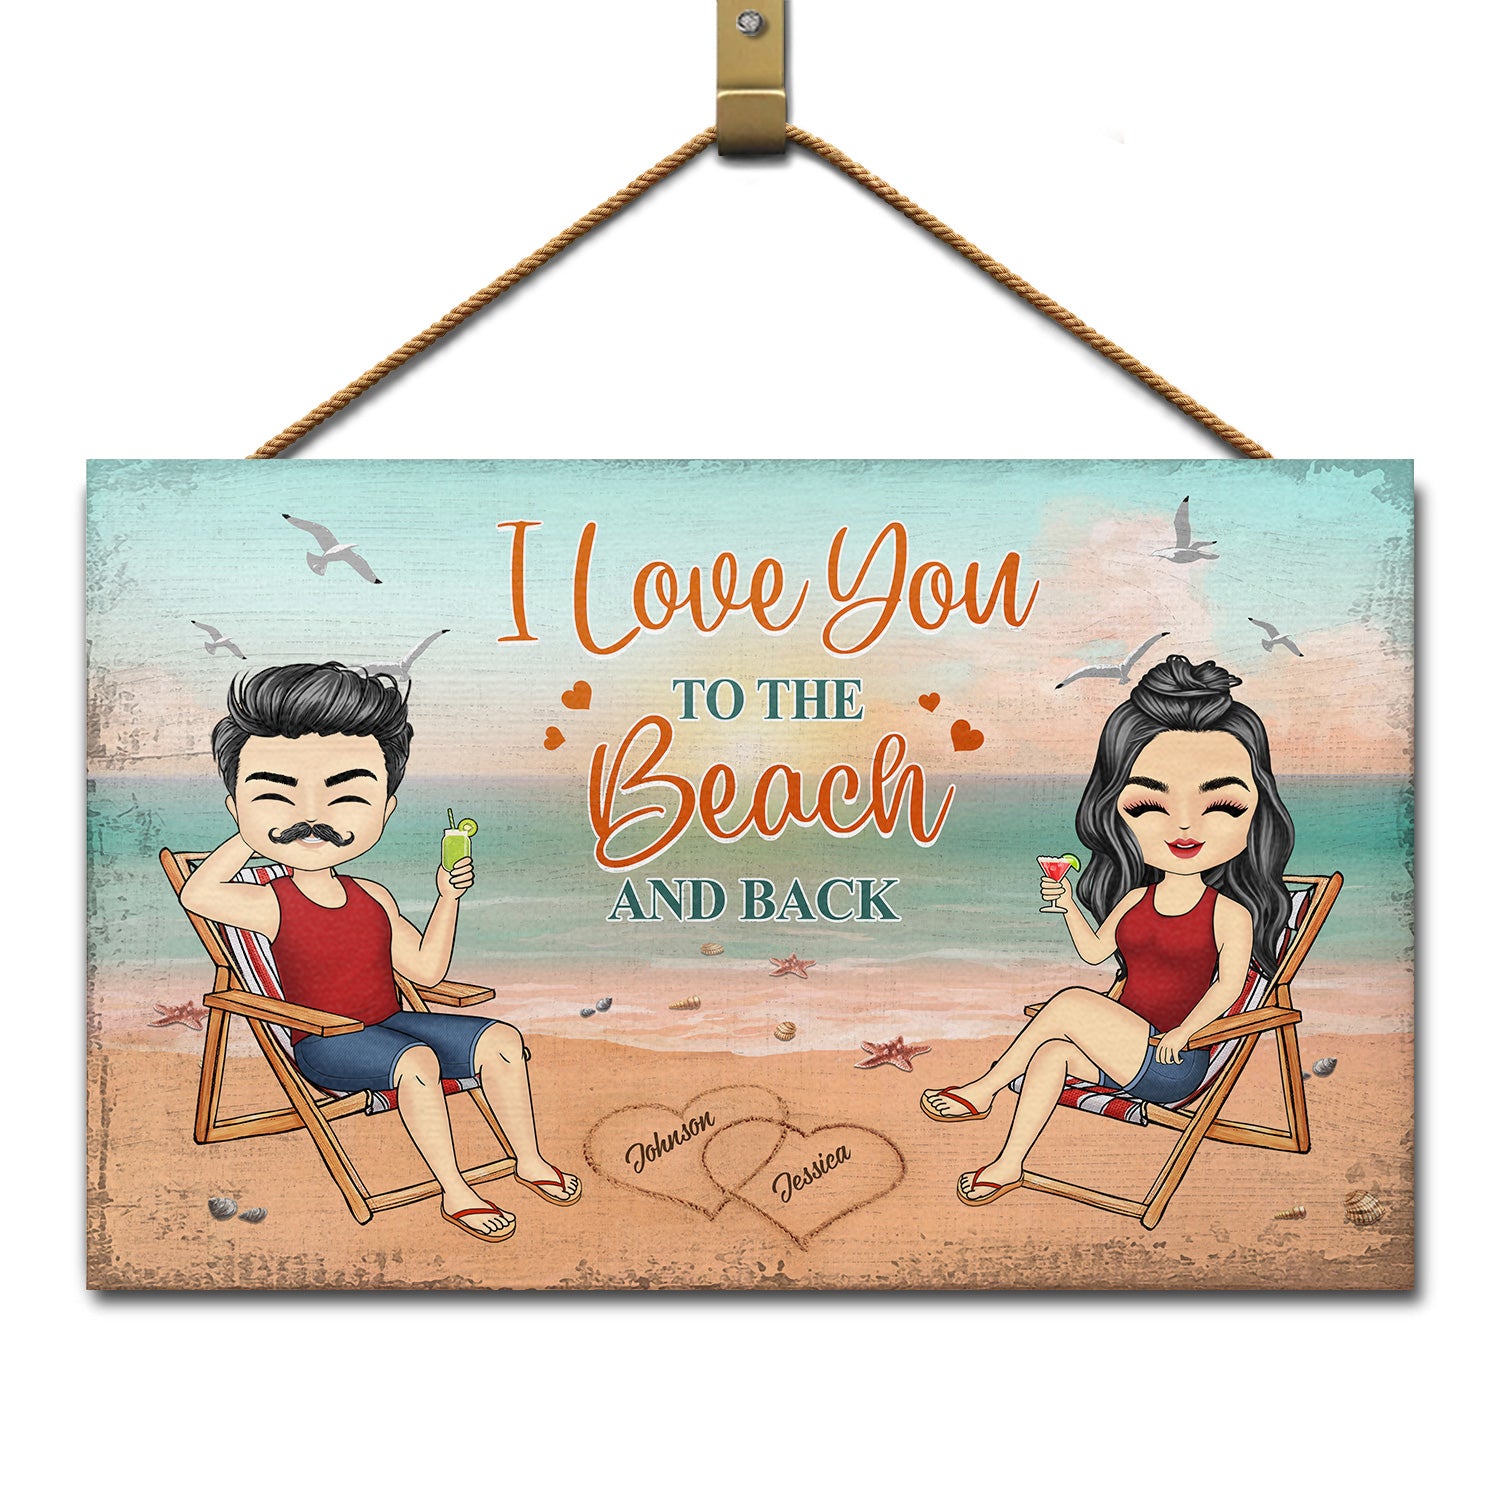 I Love You To The Beach And Back - Anniversary, Birthday Gift For Spouse, Lover, Husband, Wife, Boyfriend, Girlfriend, Summer Travel Couple - Personalized Custom Wood Rectangle Sign